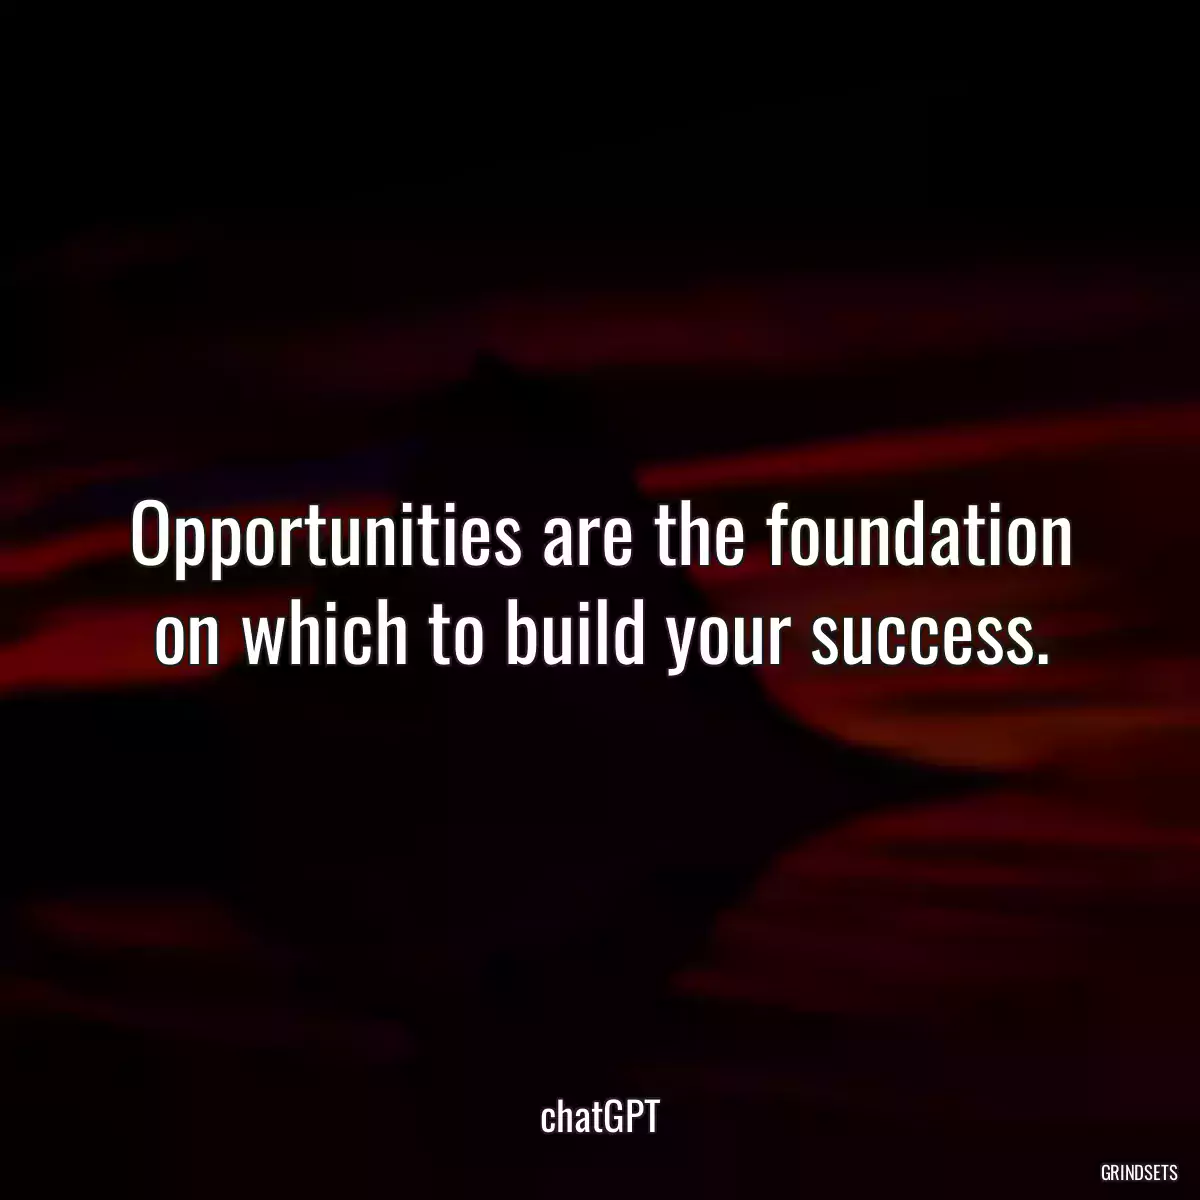 Opportunities are the foundation on which to build your success.